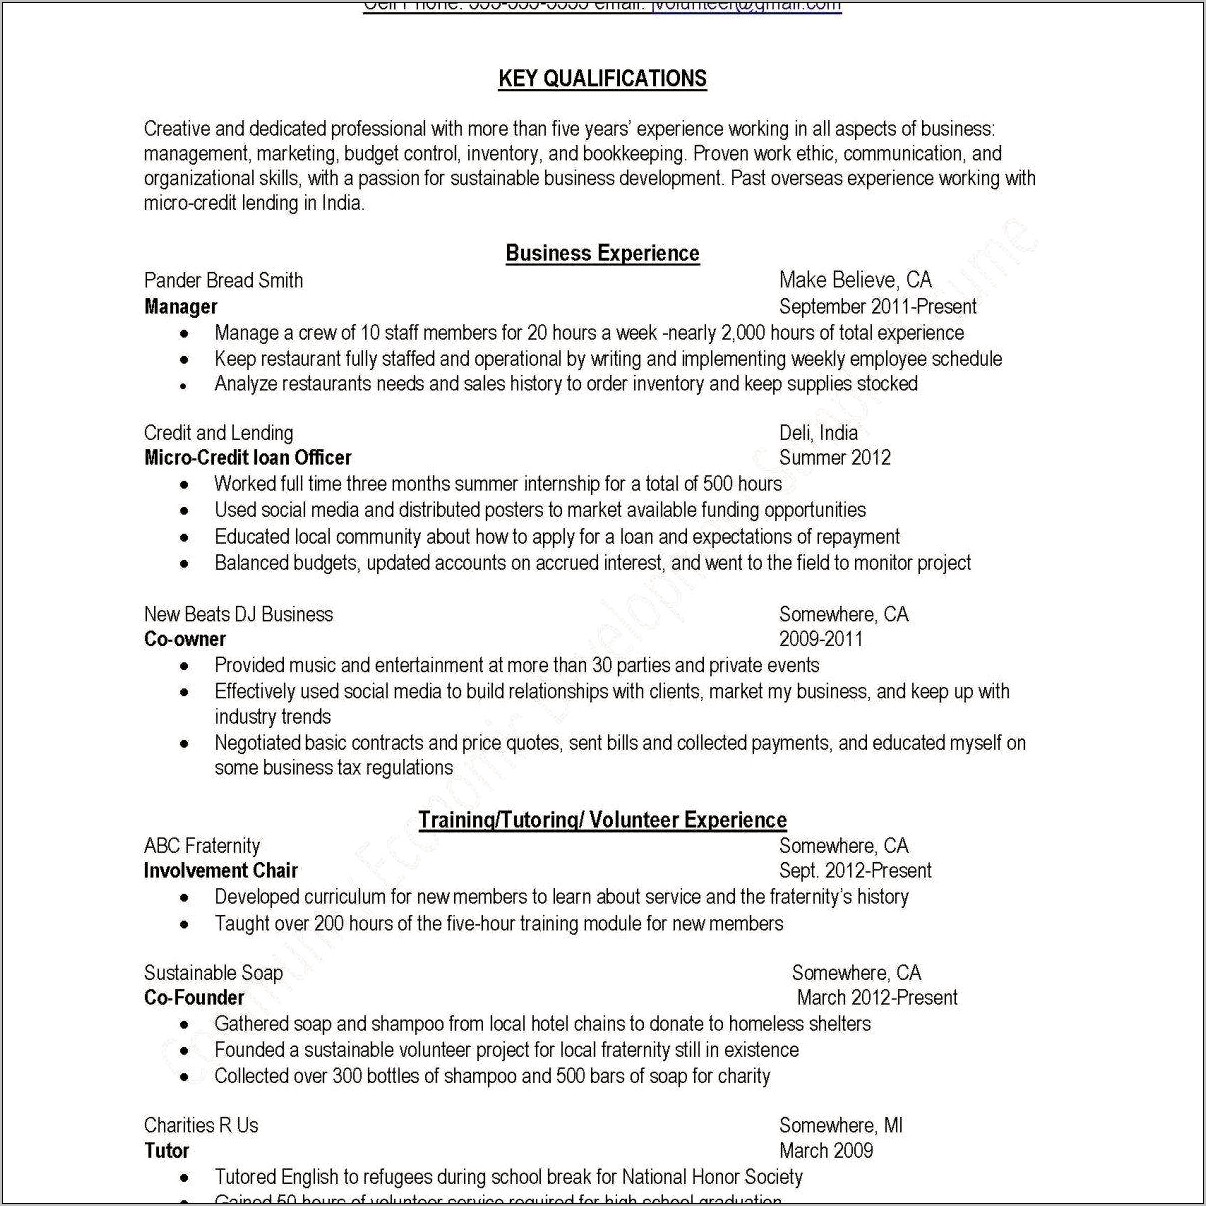 Some Activities In Put In Resume As Student